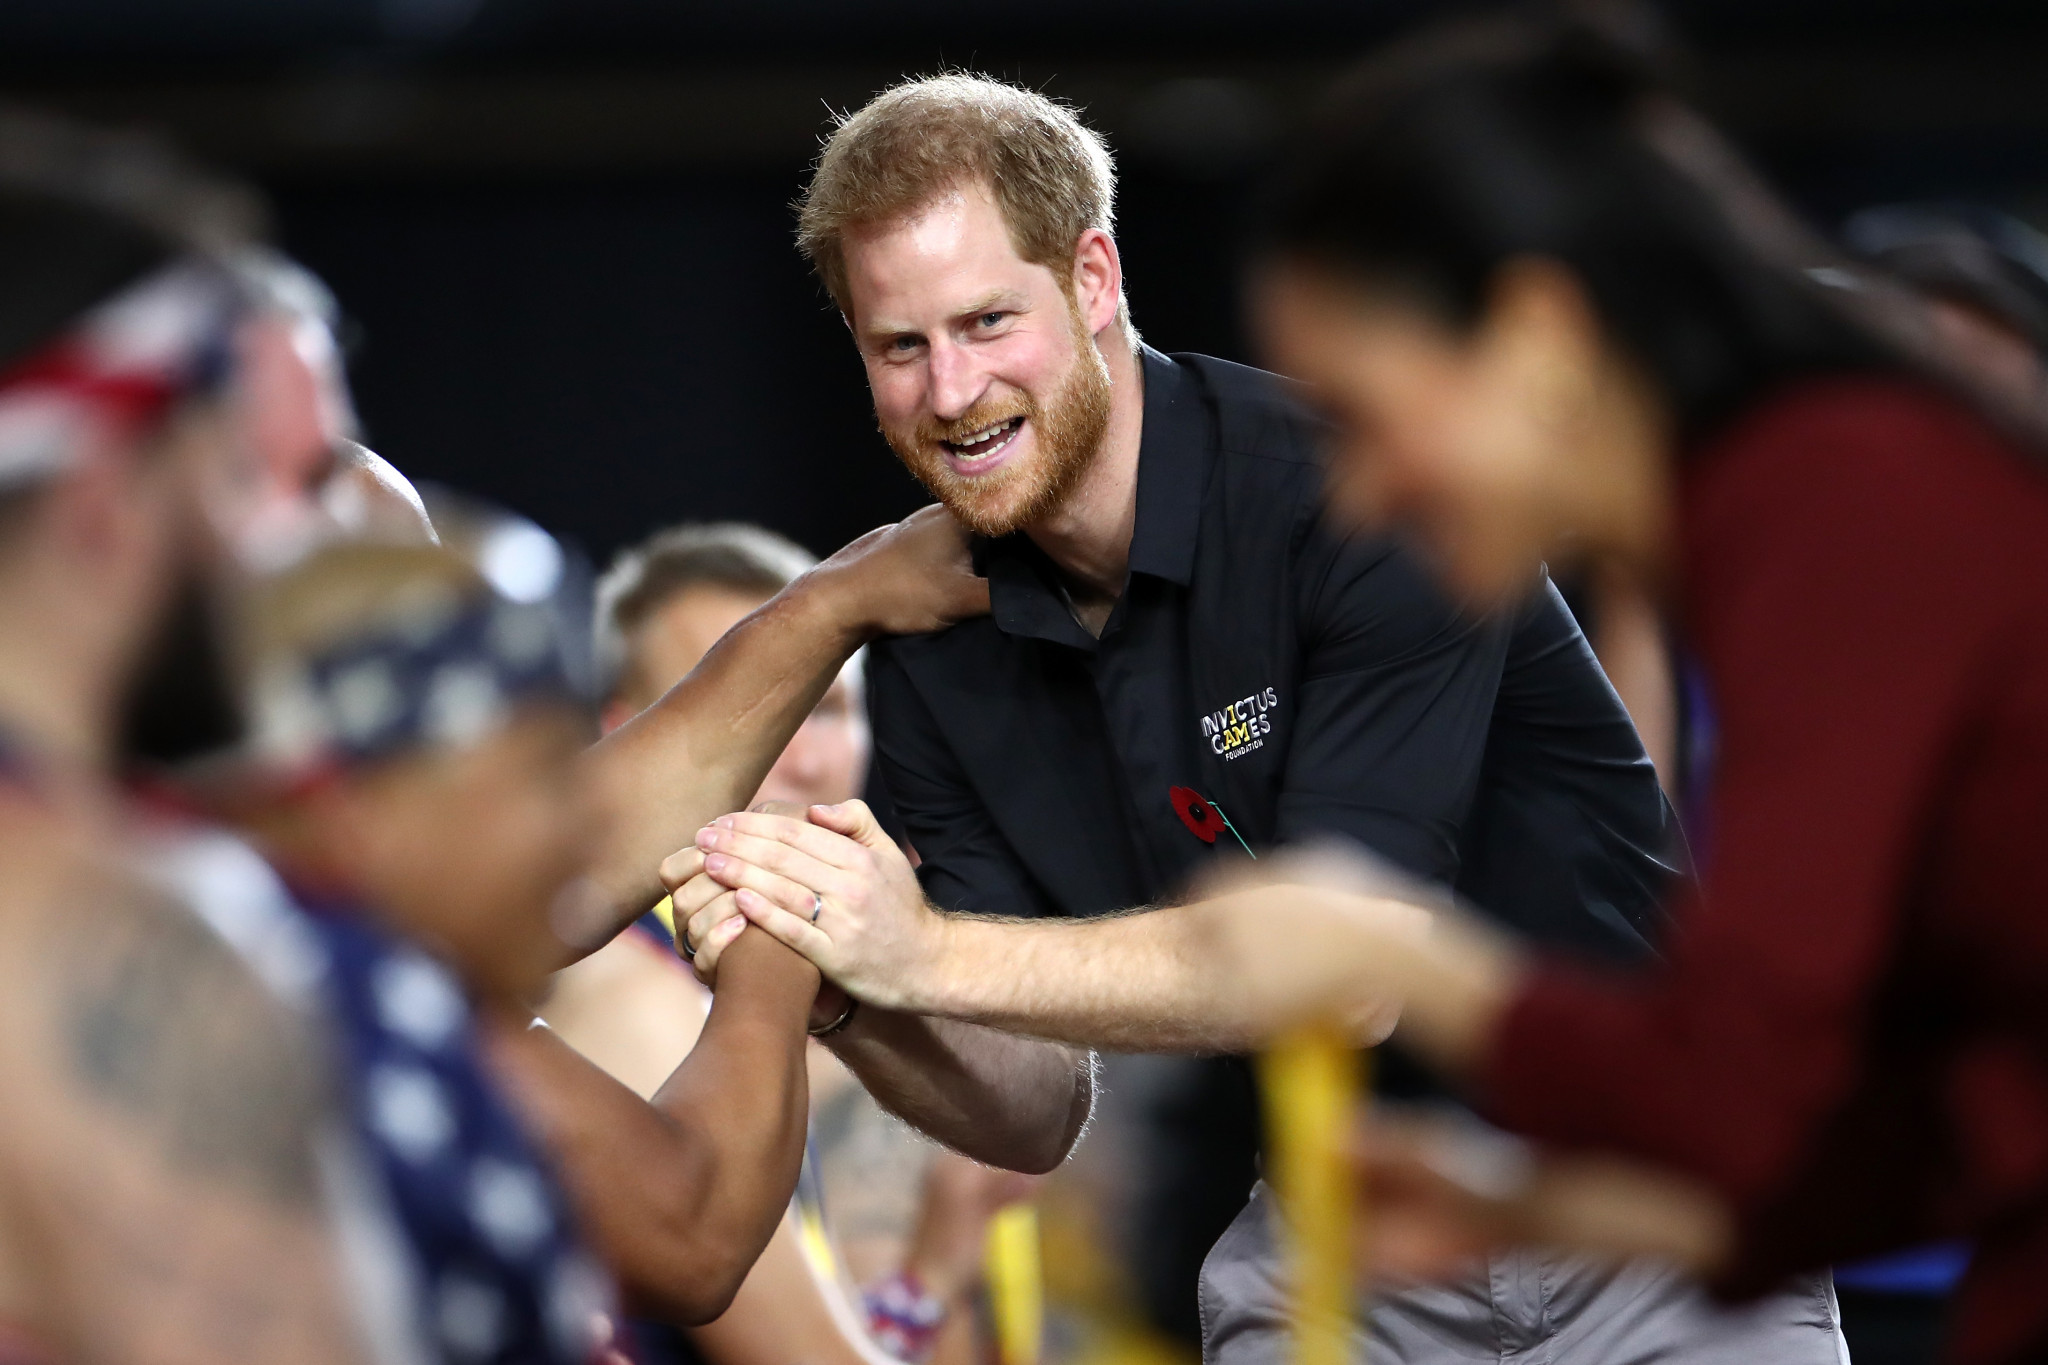 Prince Harry donates damages from British newspaper to Invictus Games as event postponed again